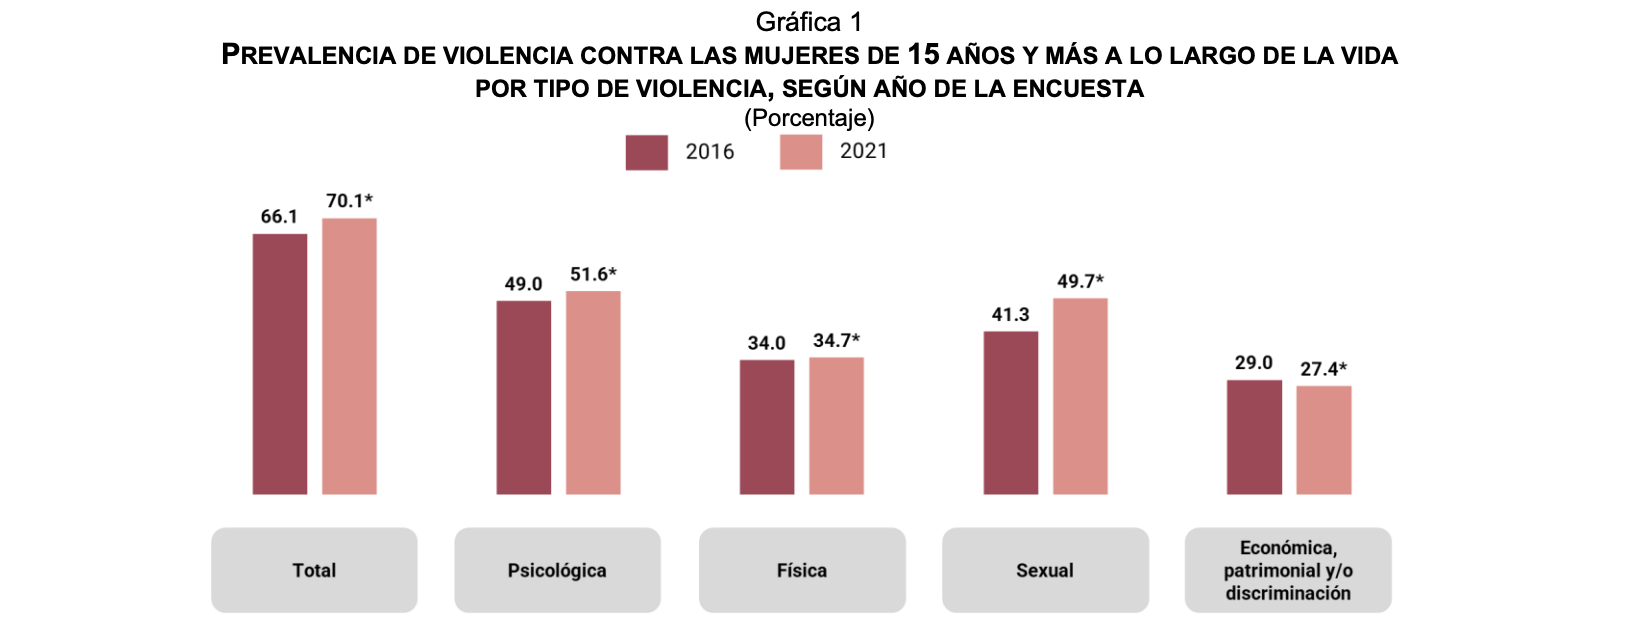 50 Of Mexican Women Experience Sexual Violence In Their Lifetime Report Latin America Reports